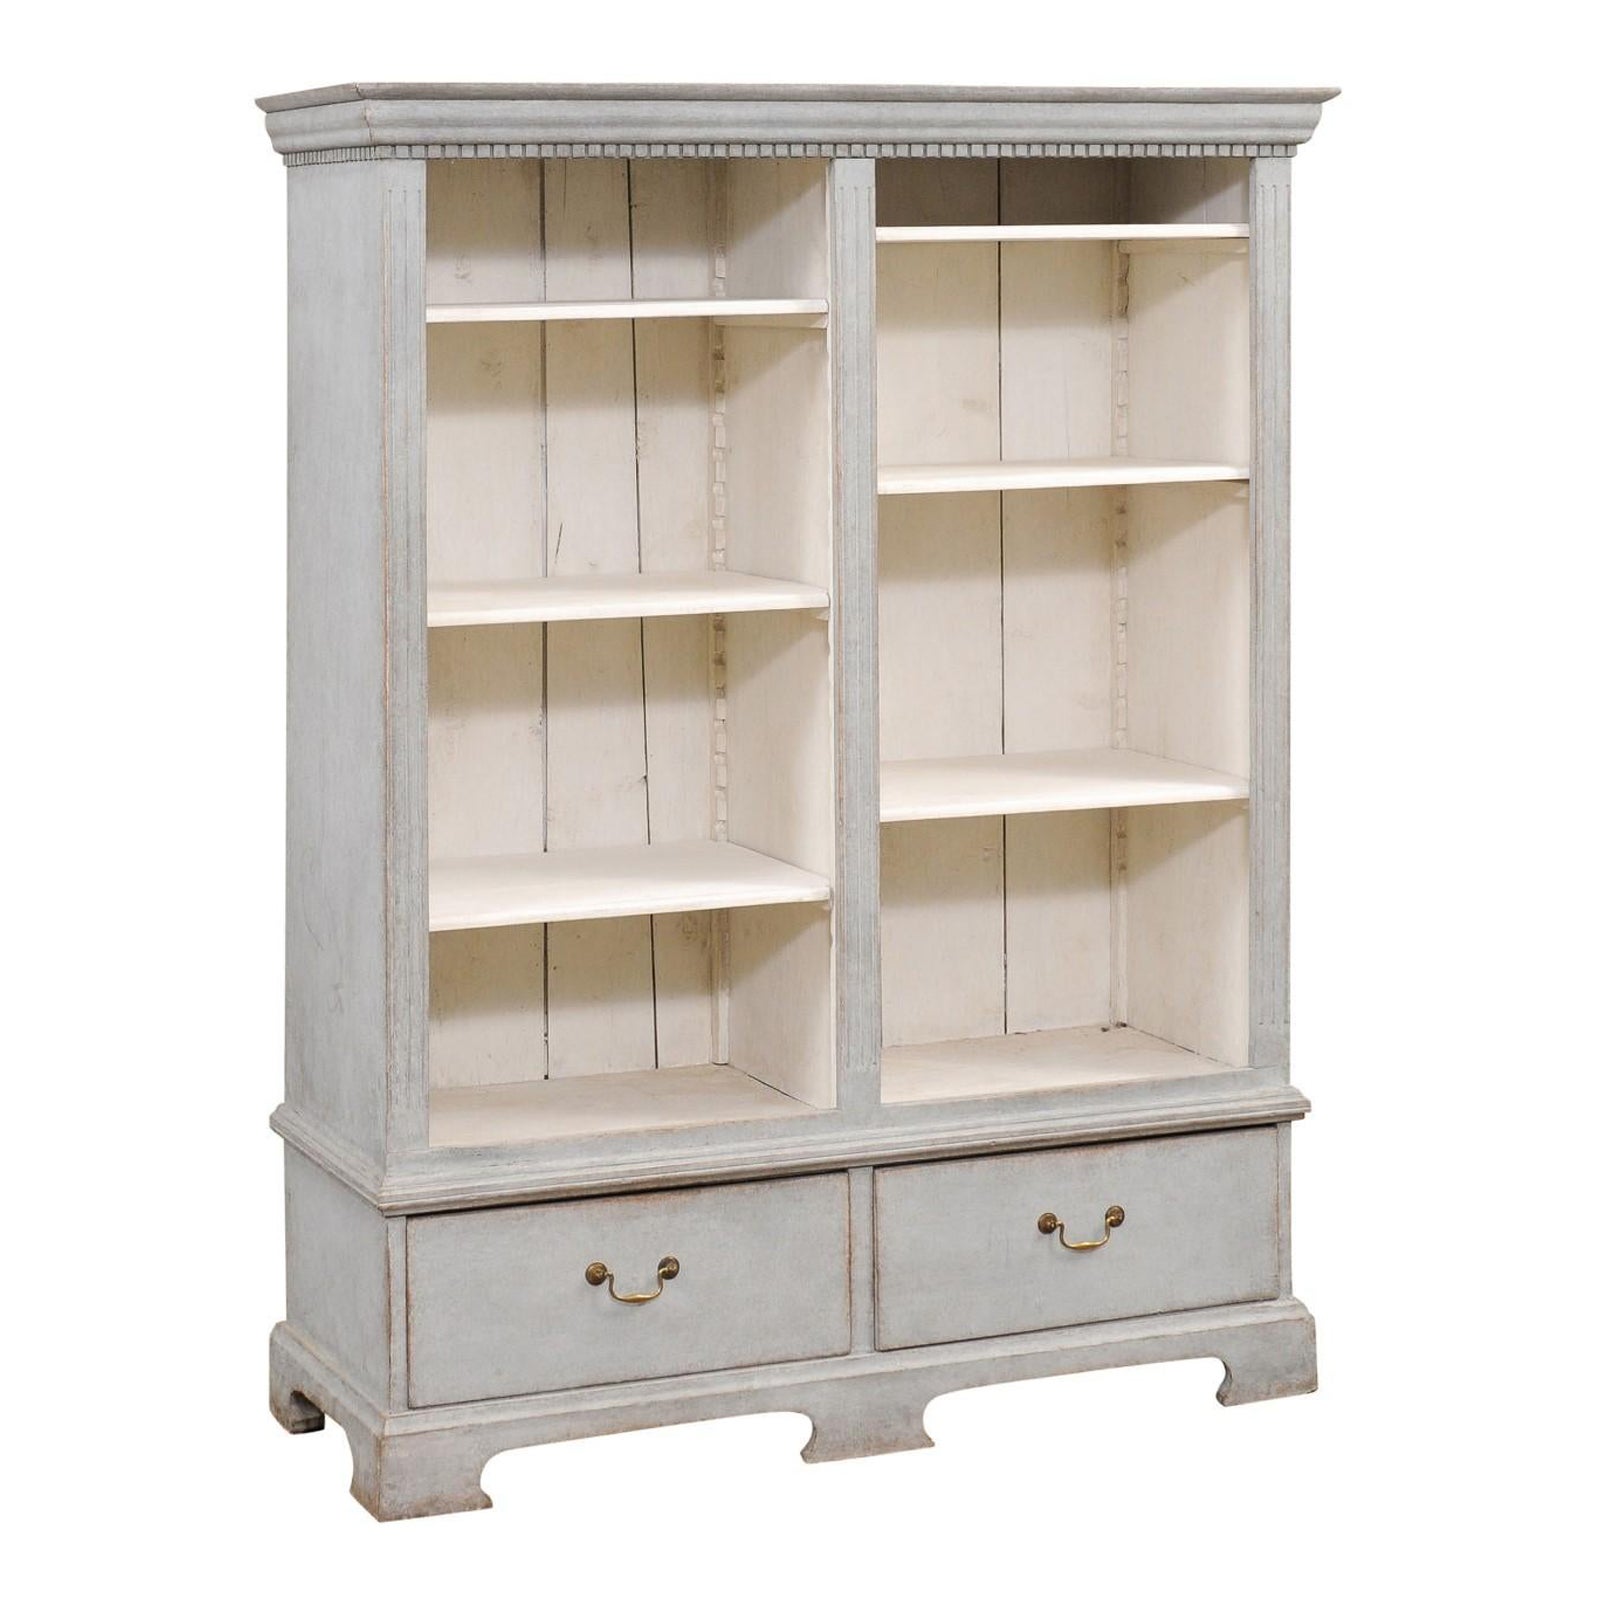  Swedish 1850s Gray Painted Bookcase with Open Shelves and Two Drawers For Sale